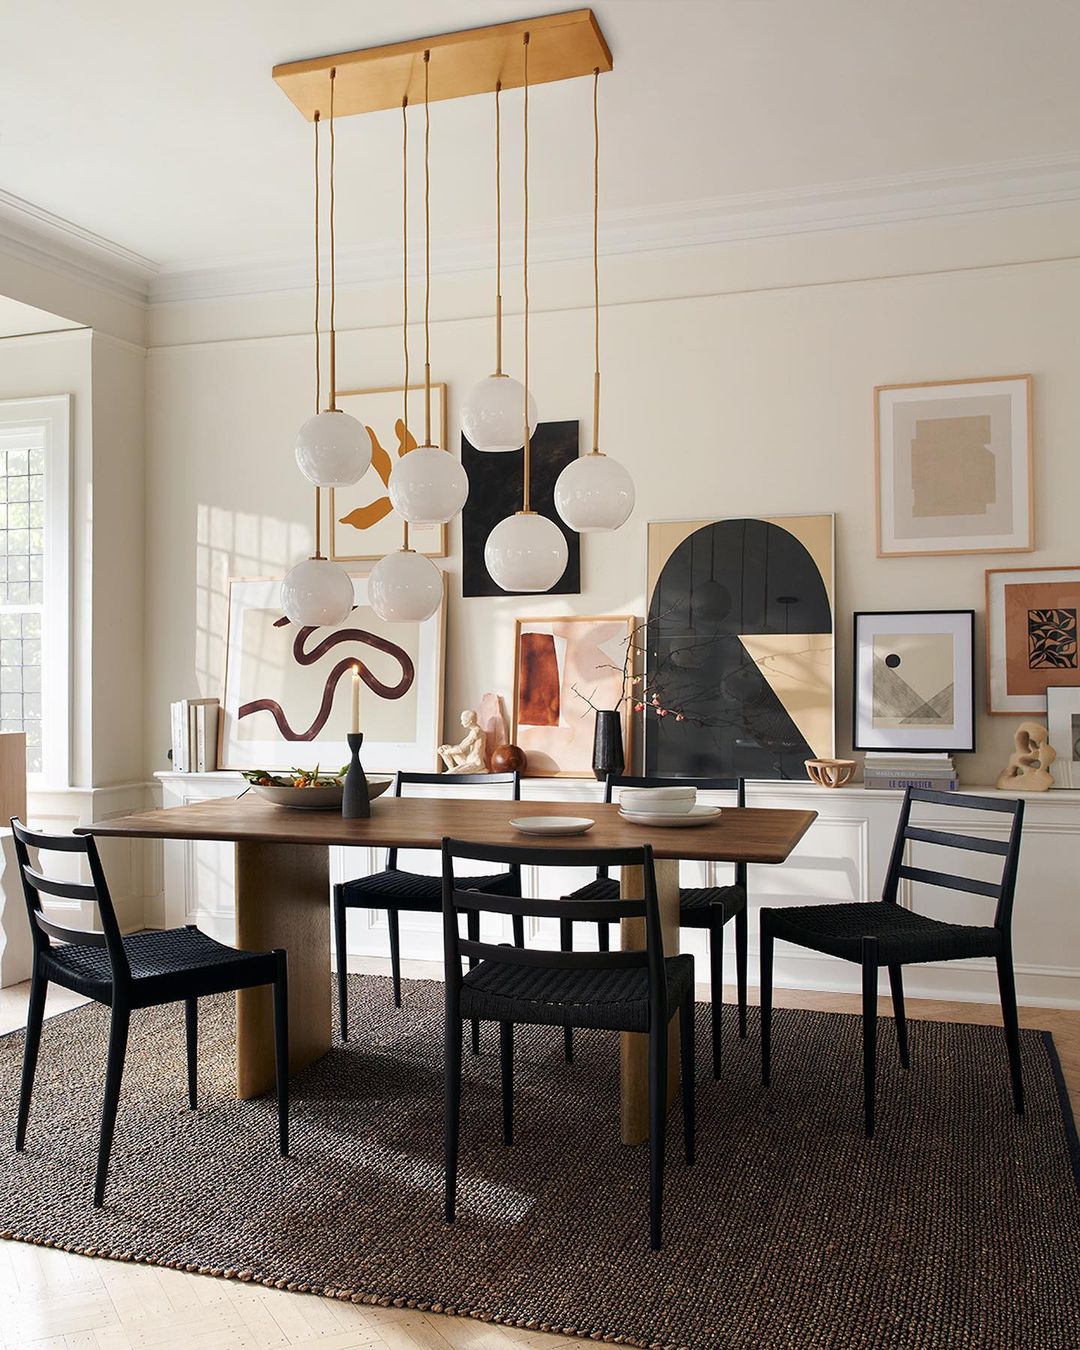 Modern Home Dining Area with Fun Lighting. Photo by Instagram user @westelm